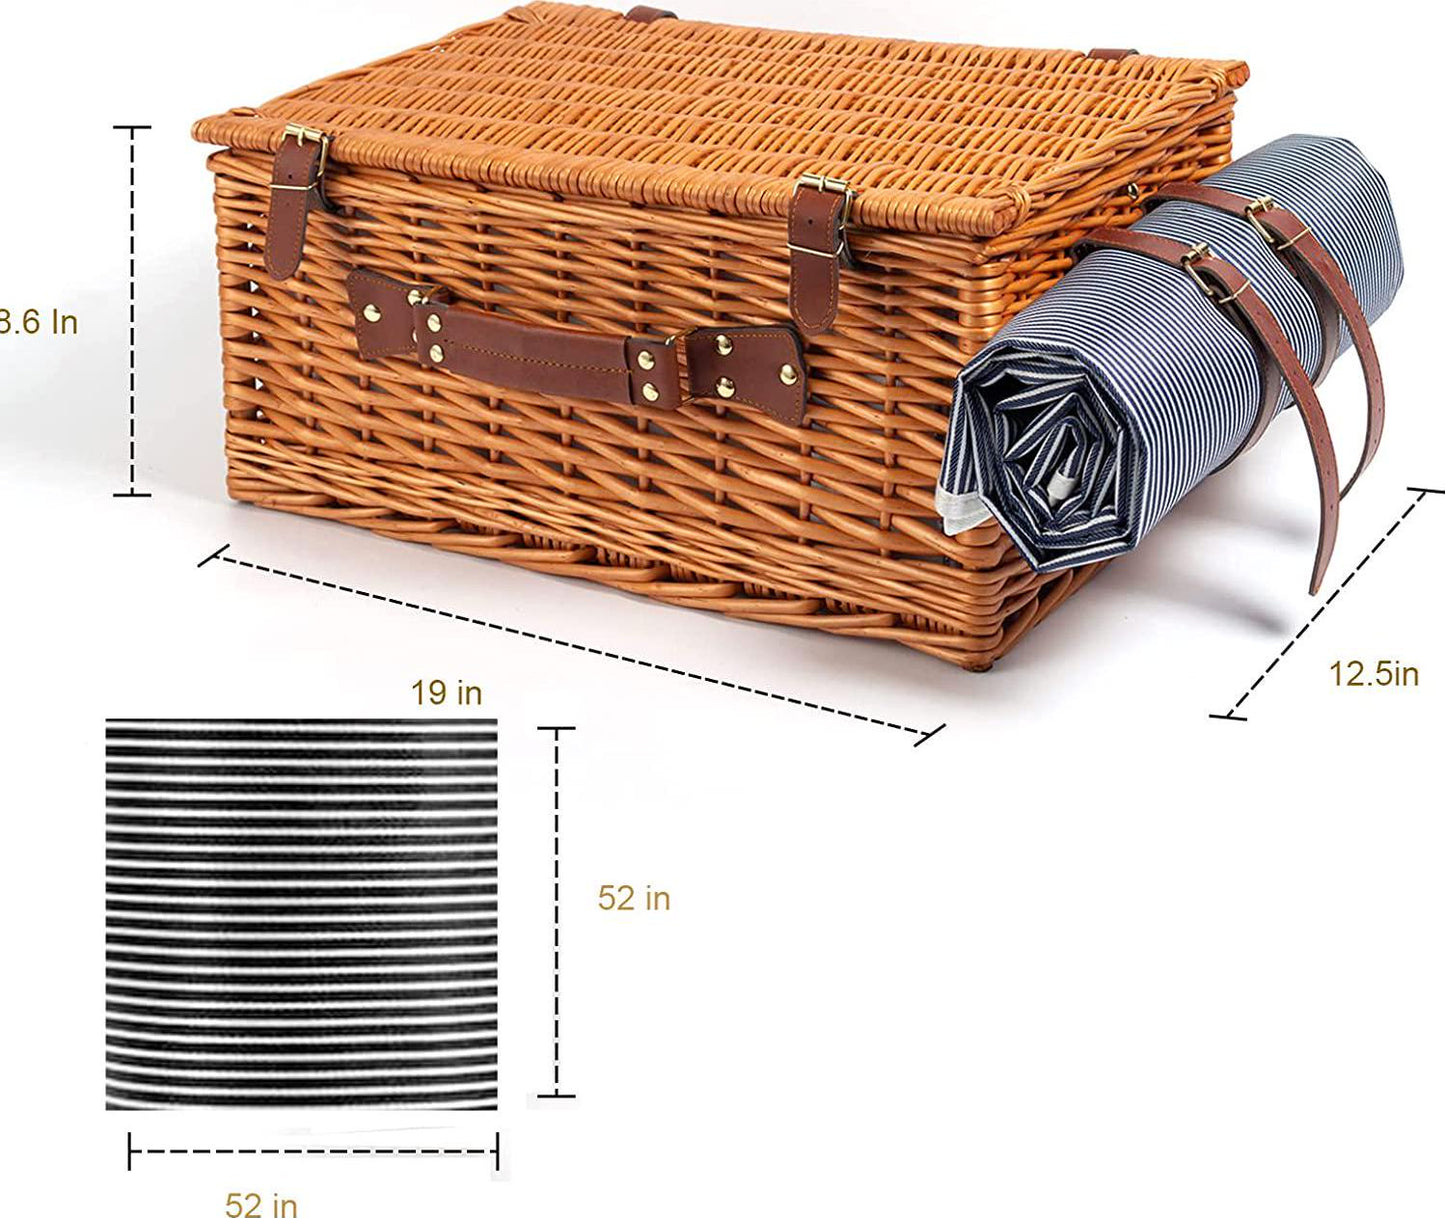 Wicker Picnic Basket for 4 Persons with Waterproof Picnic Blanket,Picnic Set for Family with Insulated Cooler Compartment Utensils,Wedding Gifts for Couples Unique